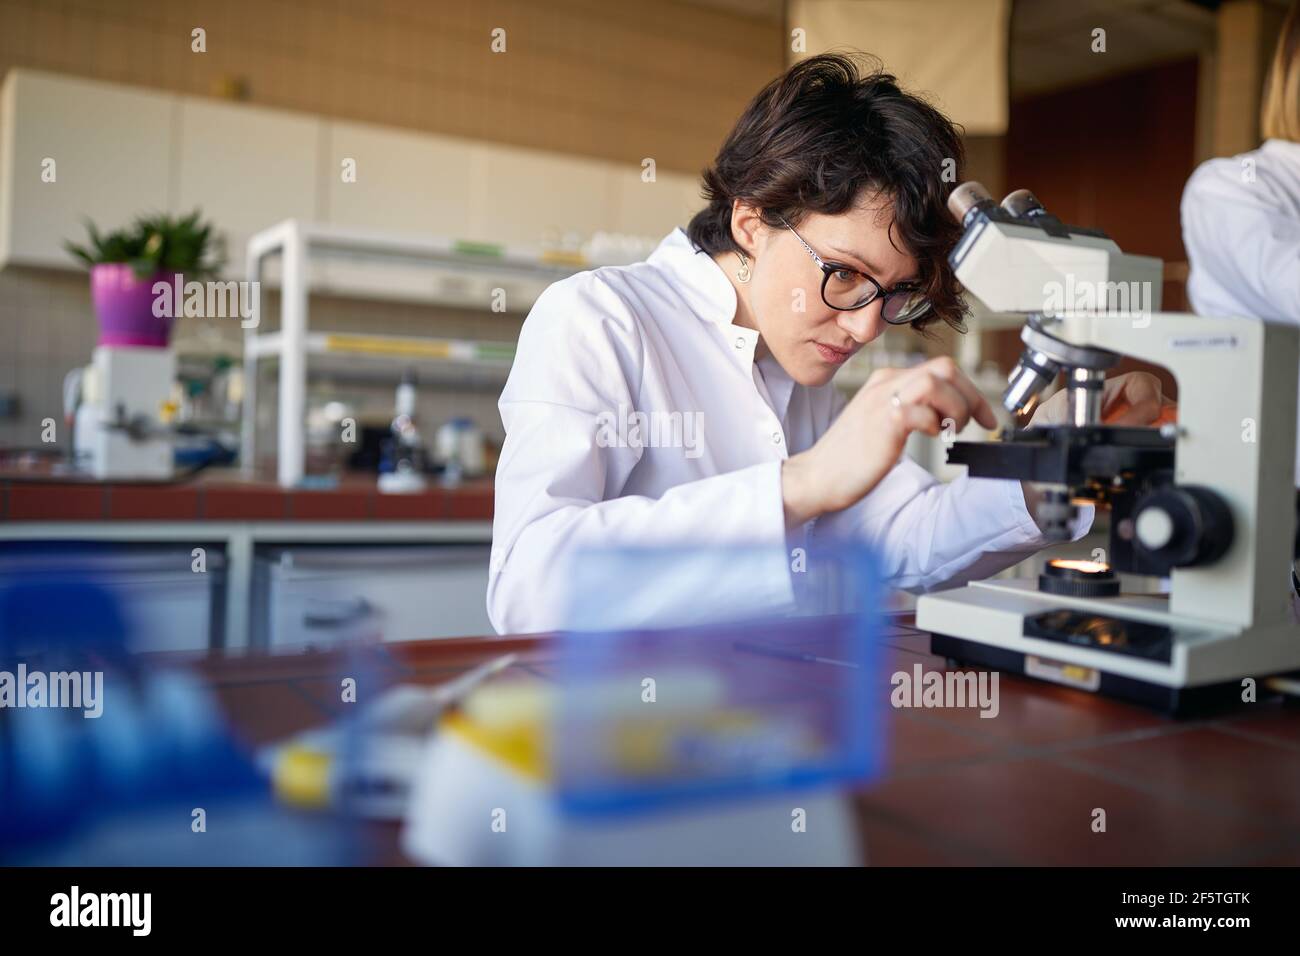 A young female scientist puts sample to the microscope in a working atmosphere at the university laboratory. Science, chemistry, lab, people Stock Photo